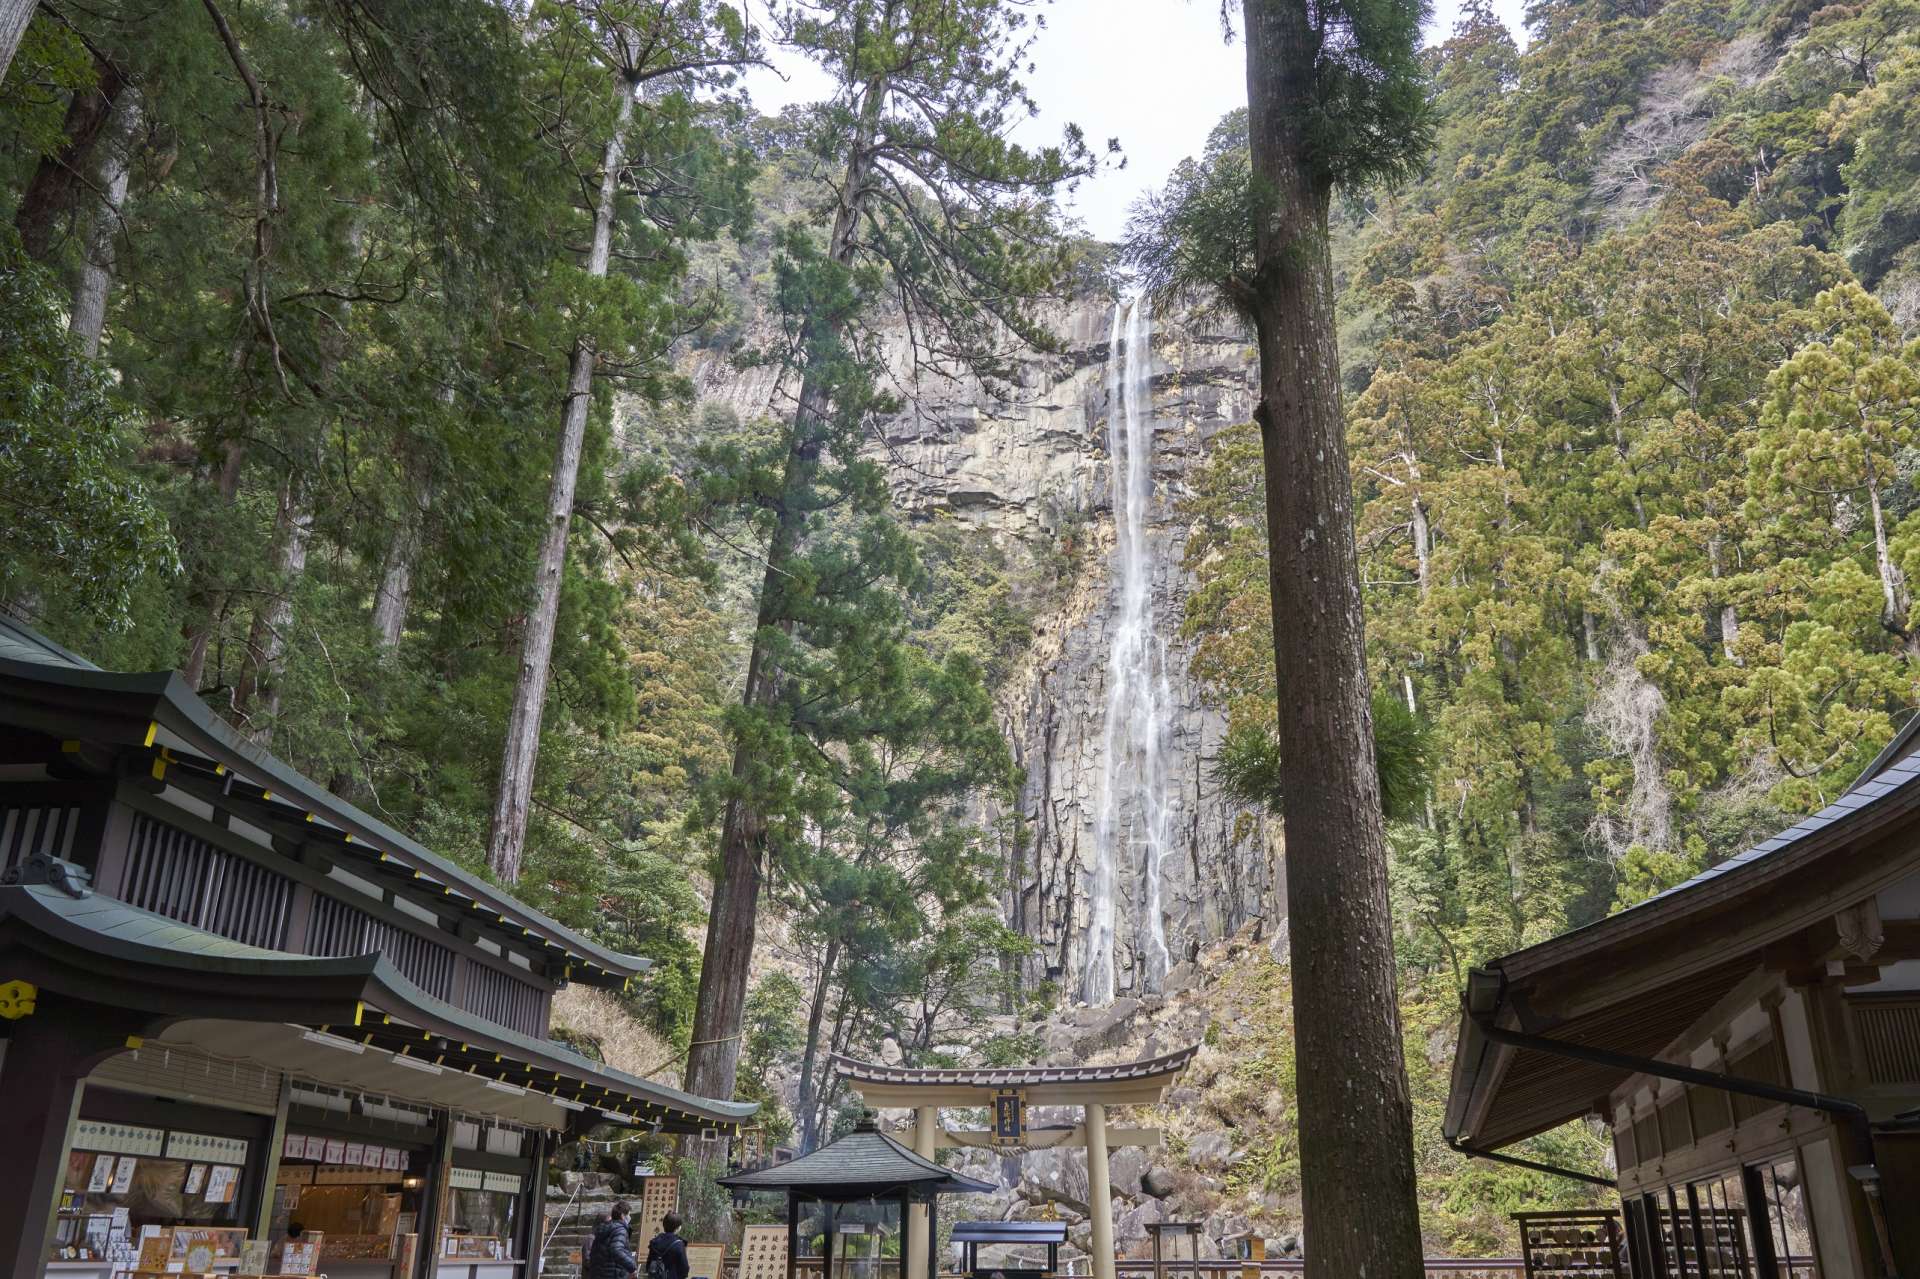 The sacred Nachi Waterfall has been admired since antiquity and up-close you can see why for yourself.